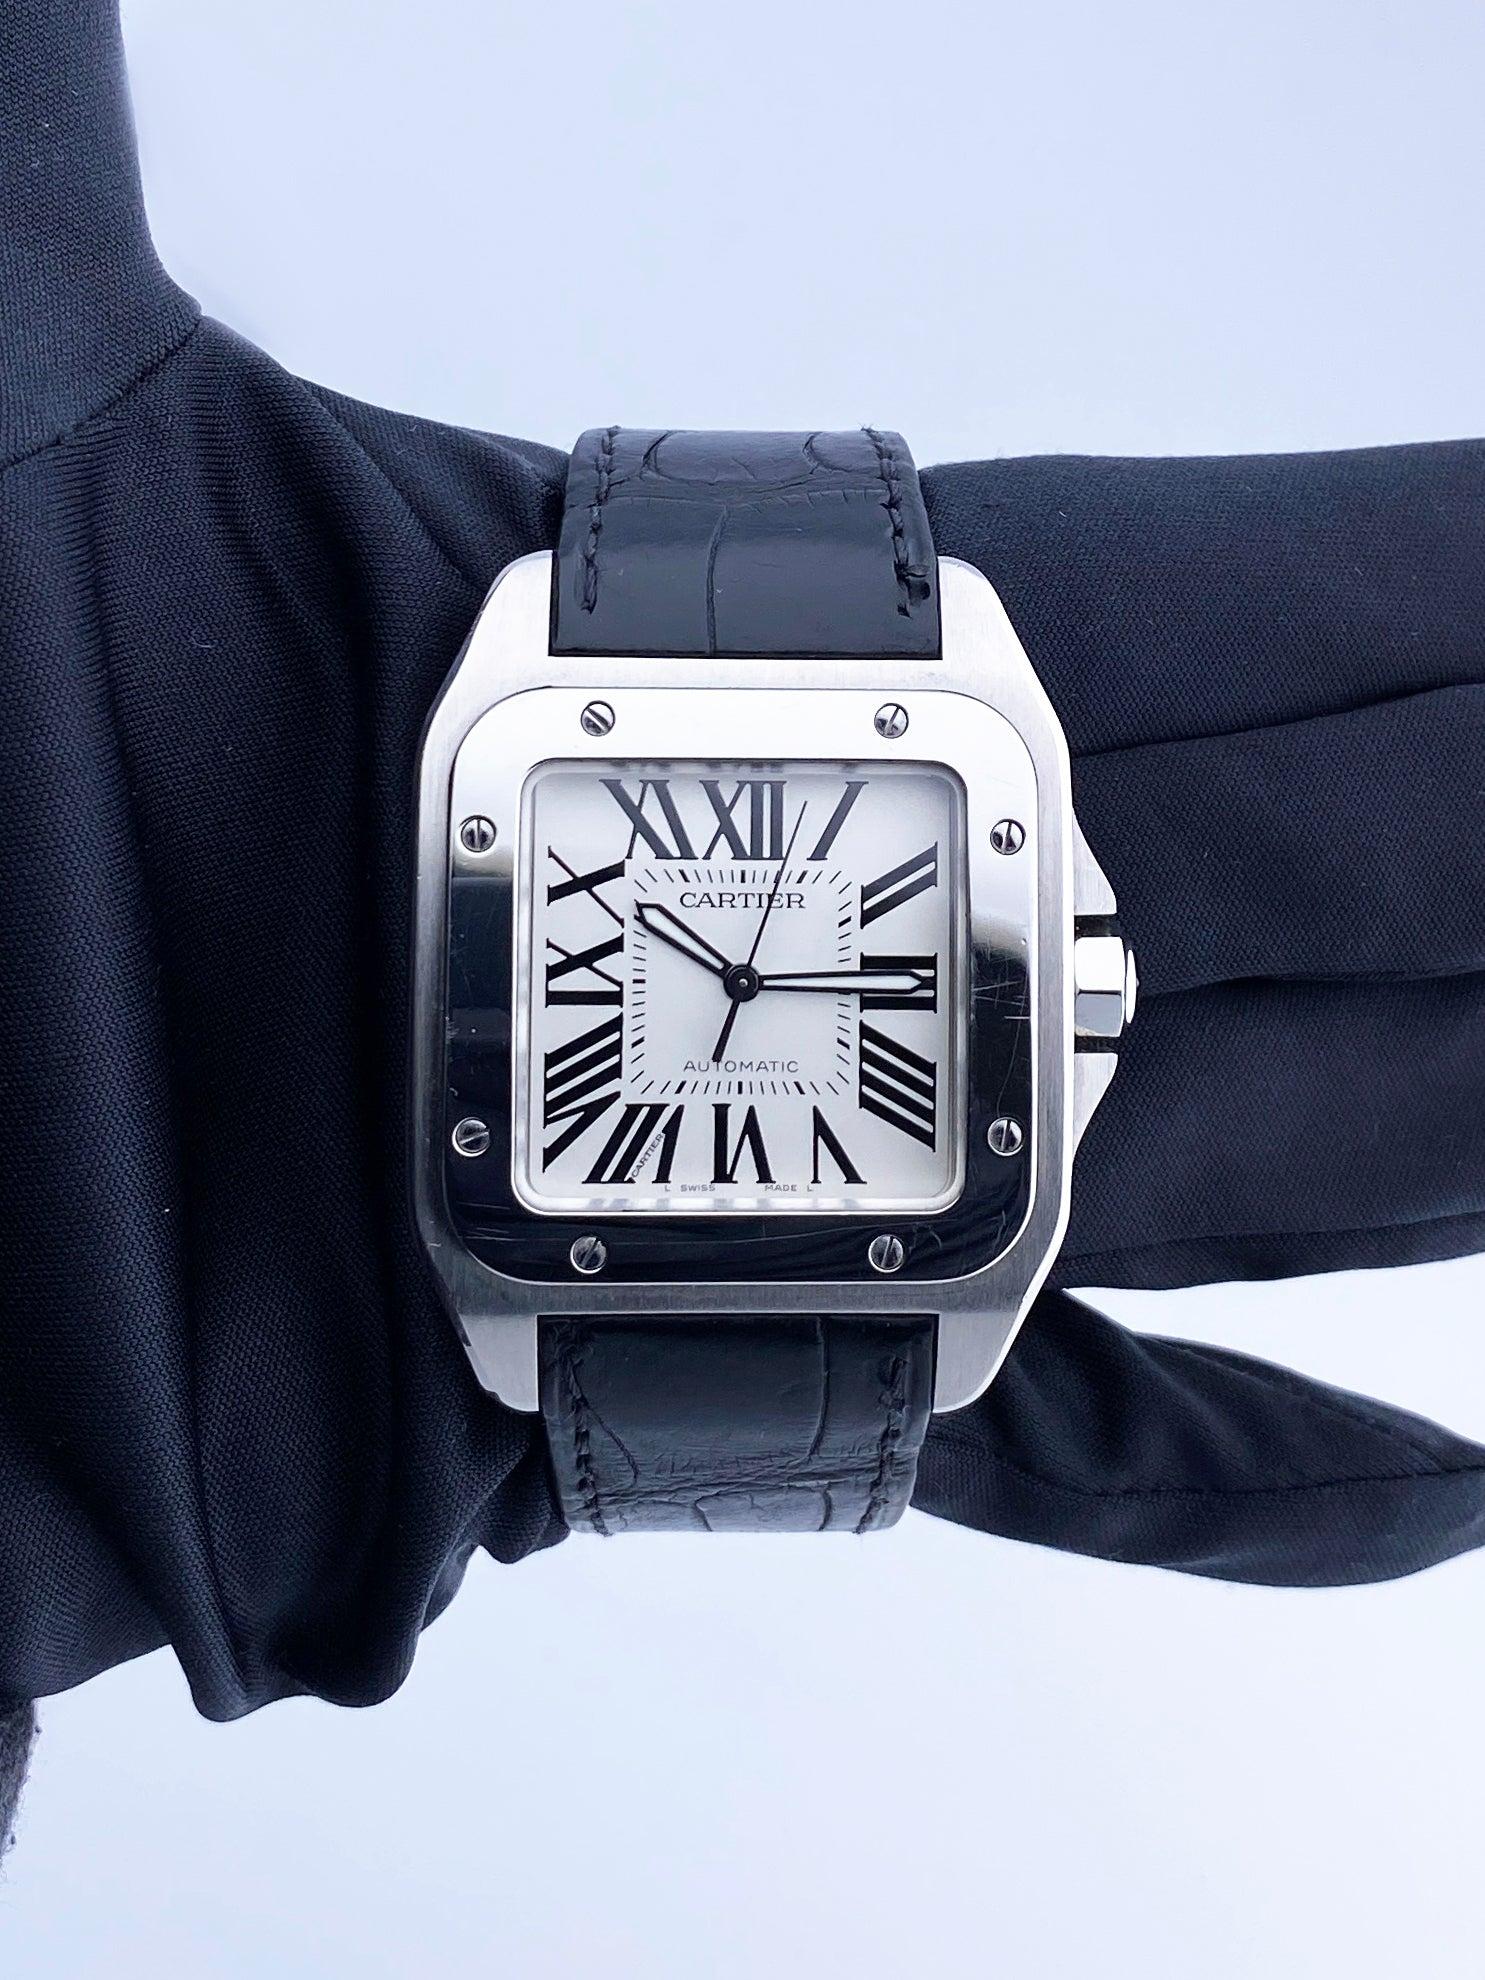 Cartier Santos-100 W20073X8 Mens Watch. 38mm stainless steel case with stainless steel fixed bezel. White dial with black steel luminous hands and black Roman numeral hour markers. Minute markers on the inner dial. Will fit up to a 7-inch wrist.